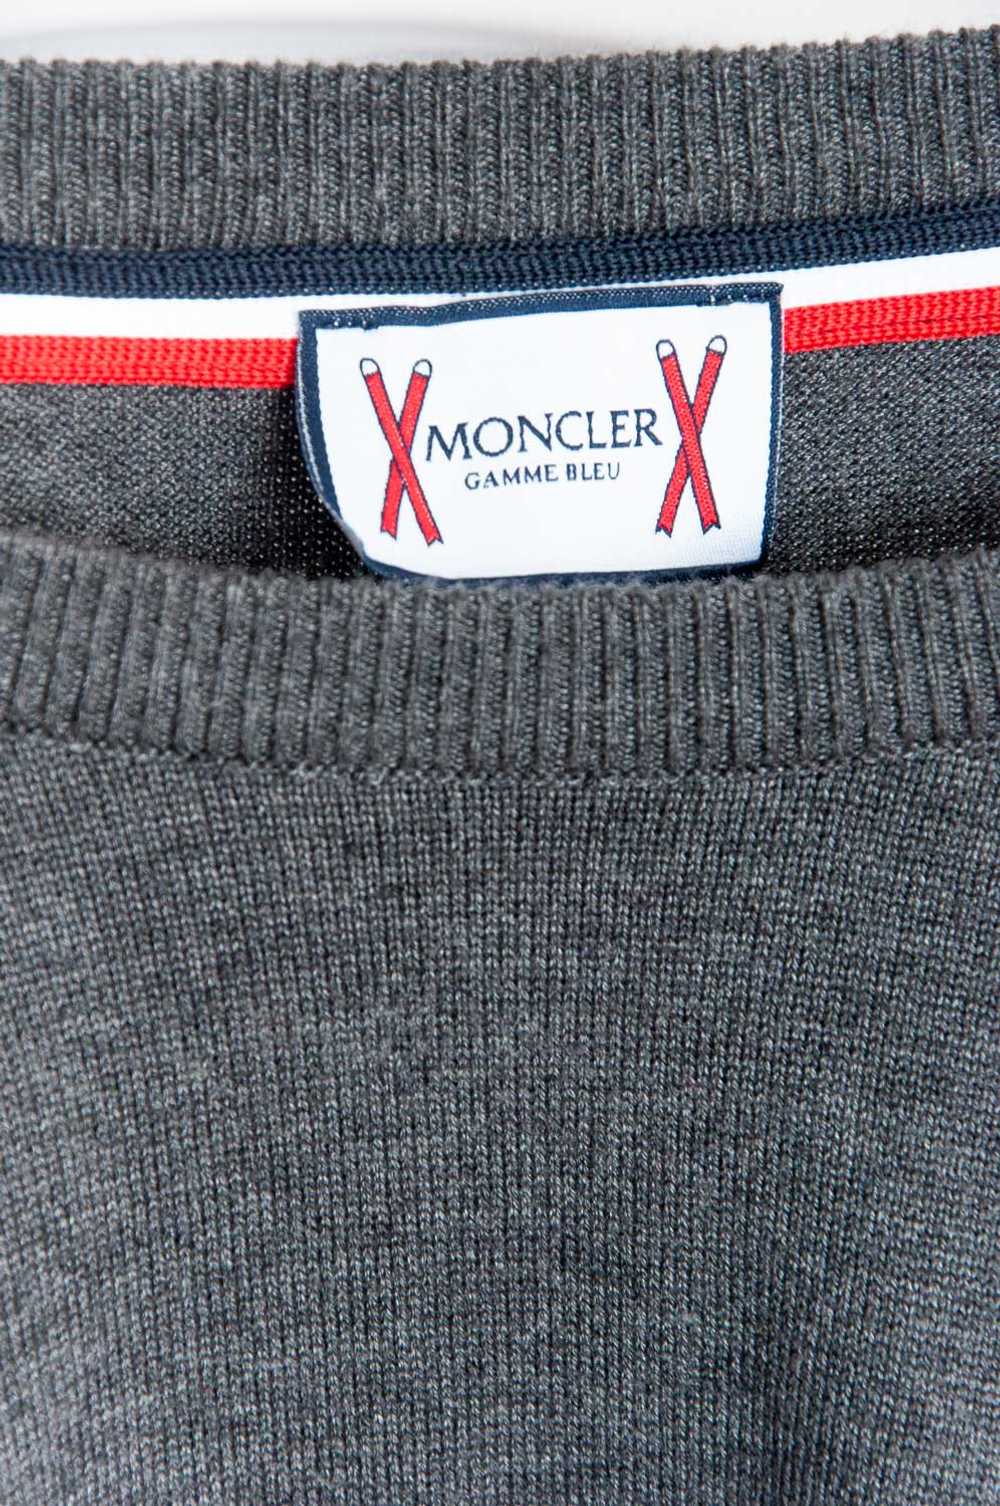 Moncler wool sweater with colorful details Grey m… - image 7